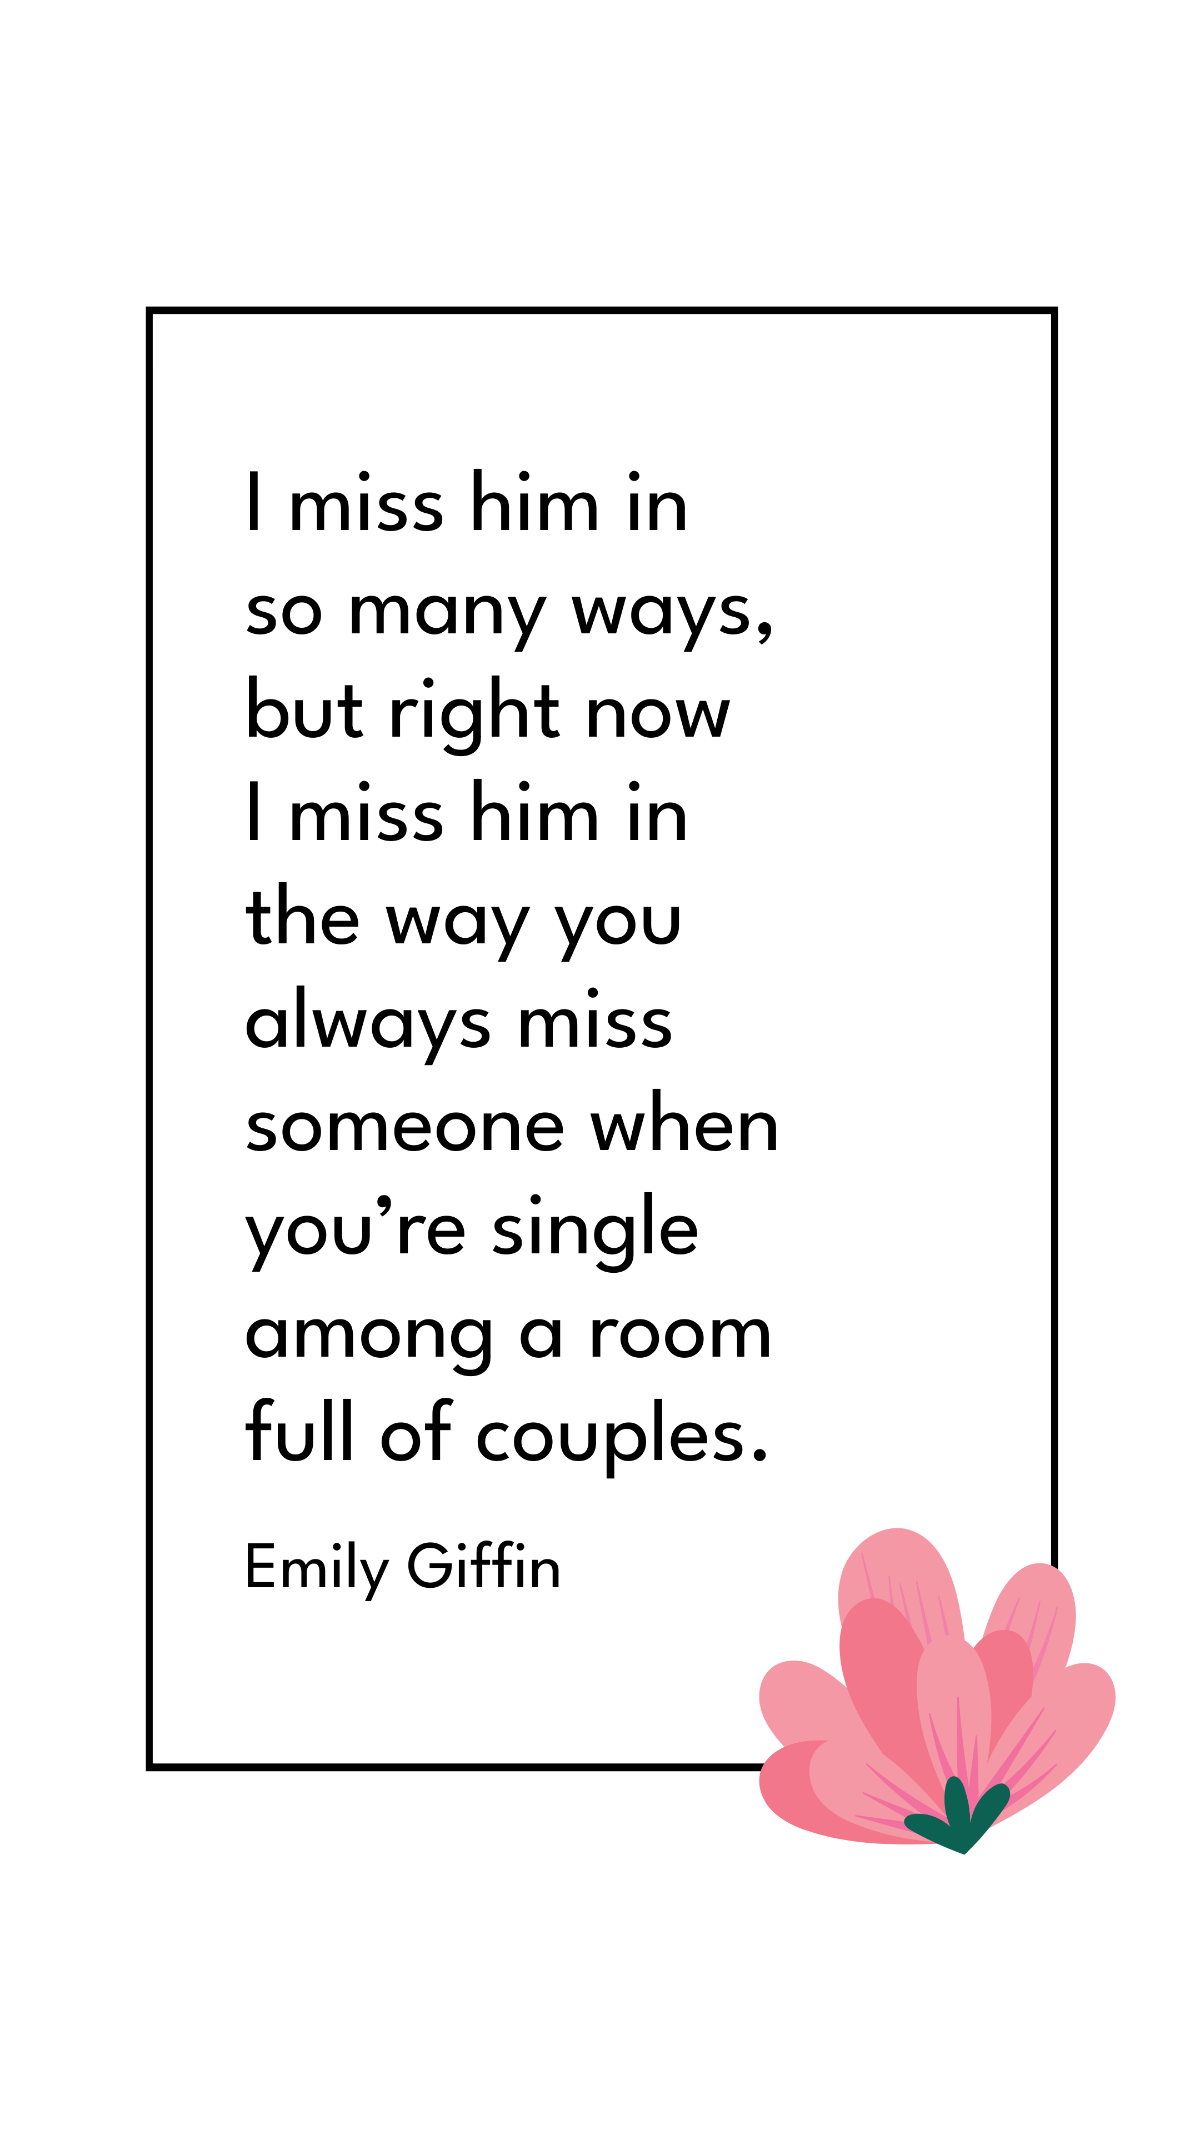 Free Emily Giffin - I miss him in so many ways, but right now I miss him in the way you always miss someone when you’re single among a room full of couples. Template